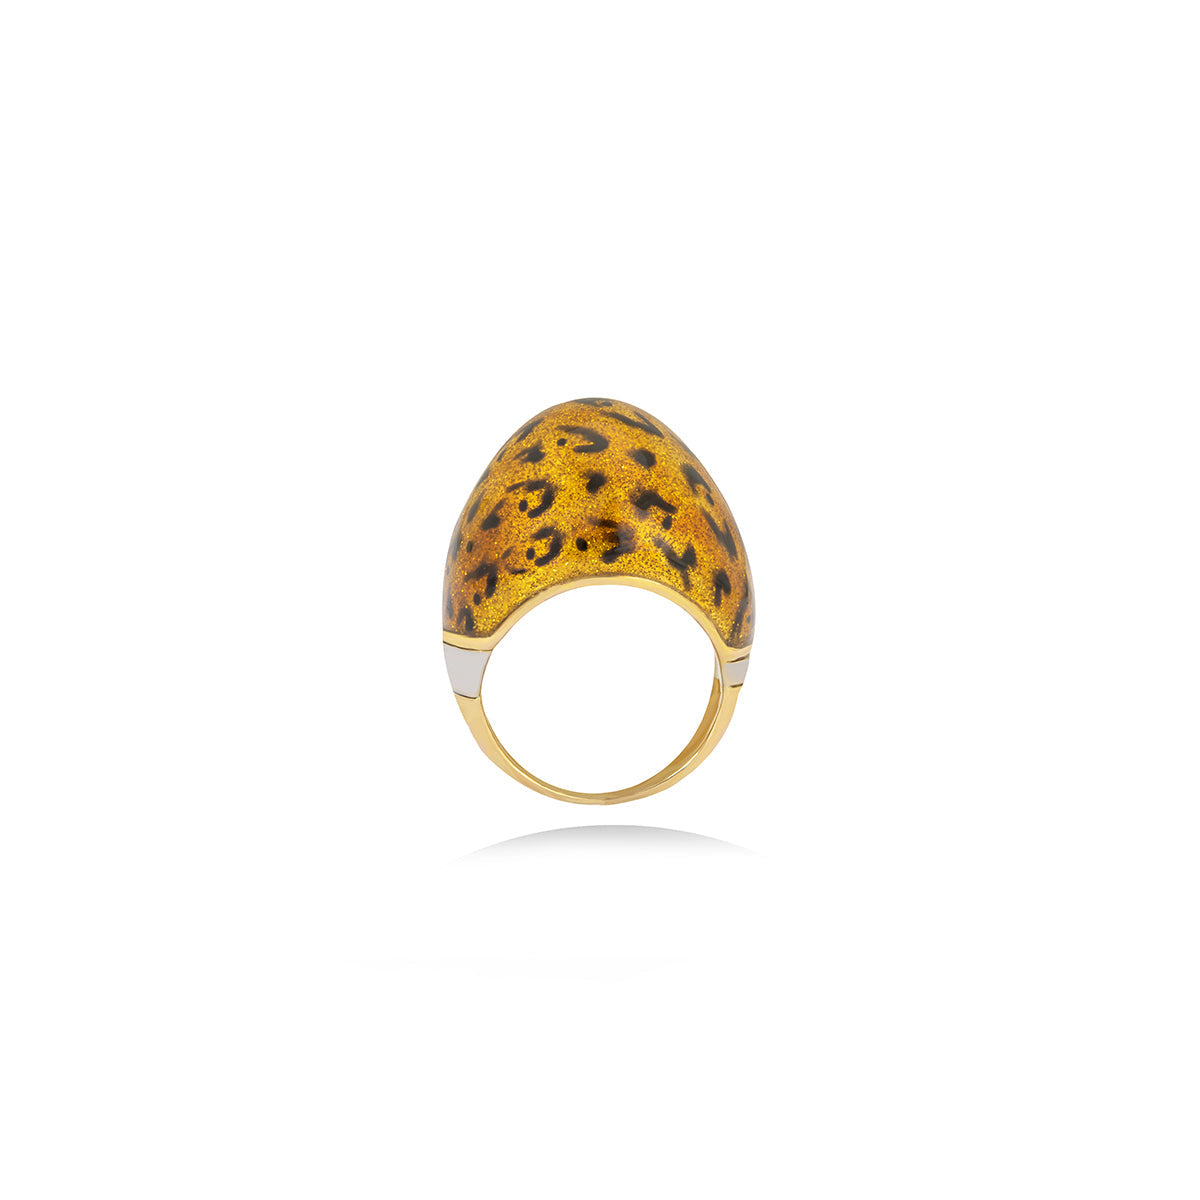 Vintage Leopard Ring in 18k Yellow Gold